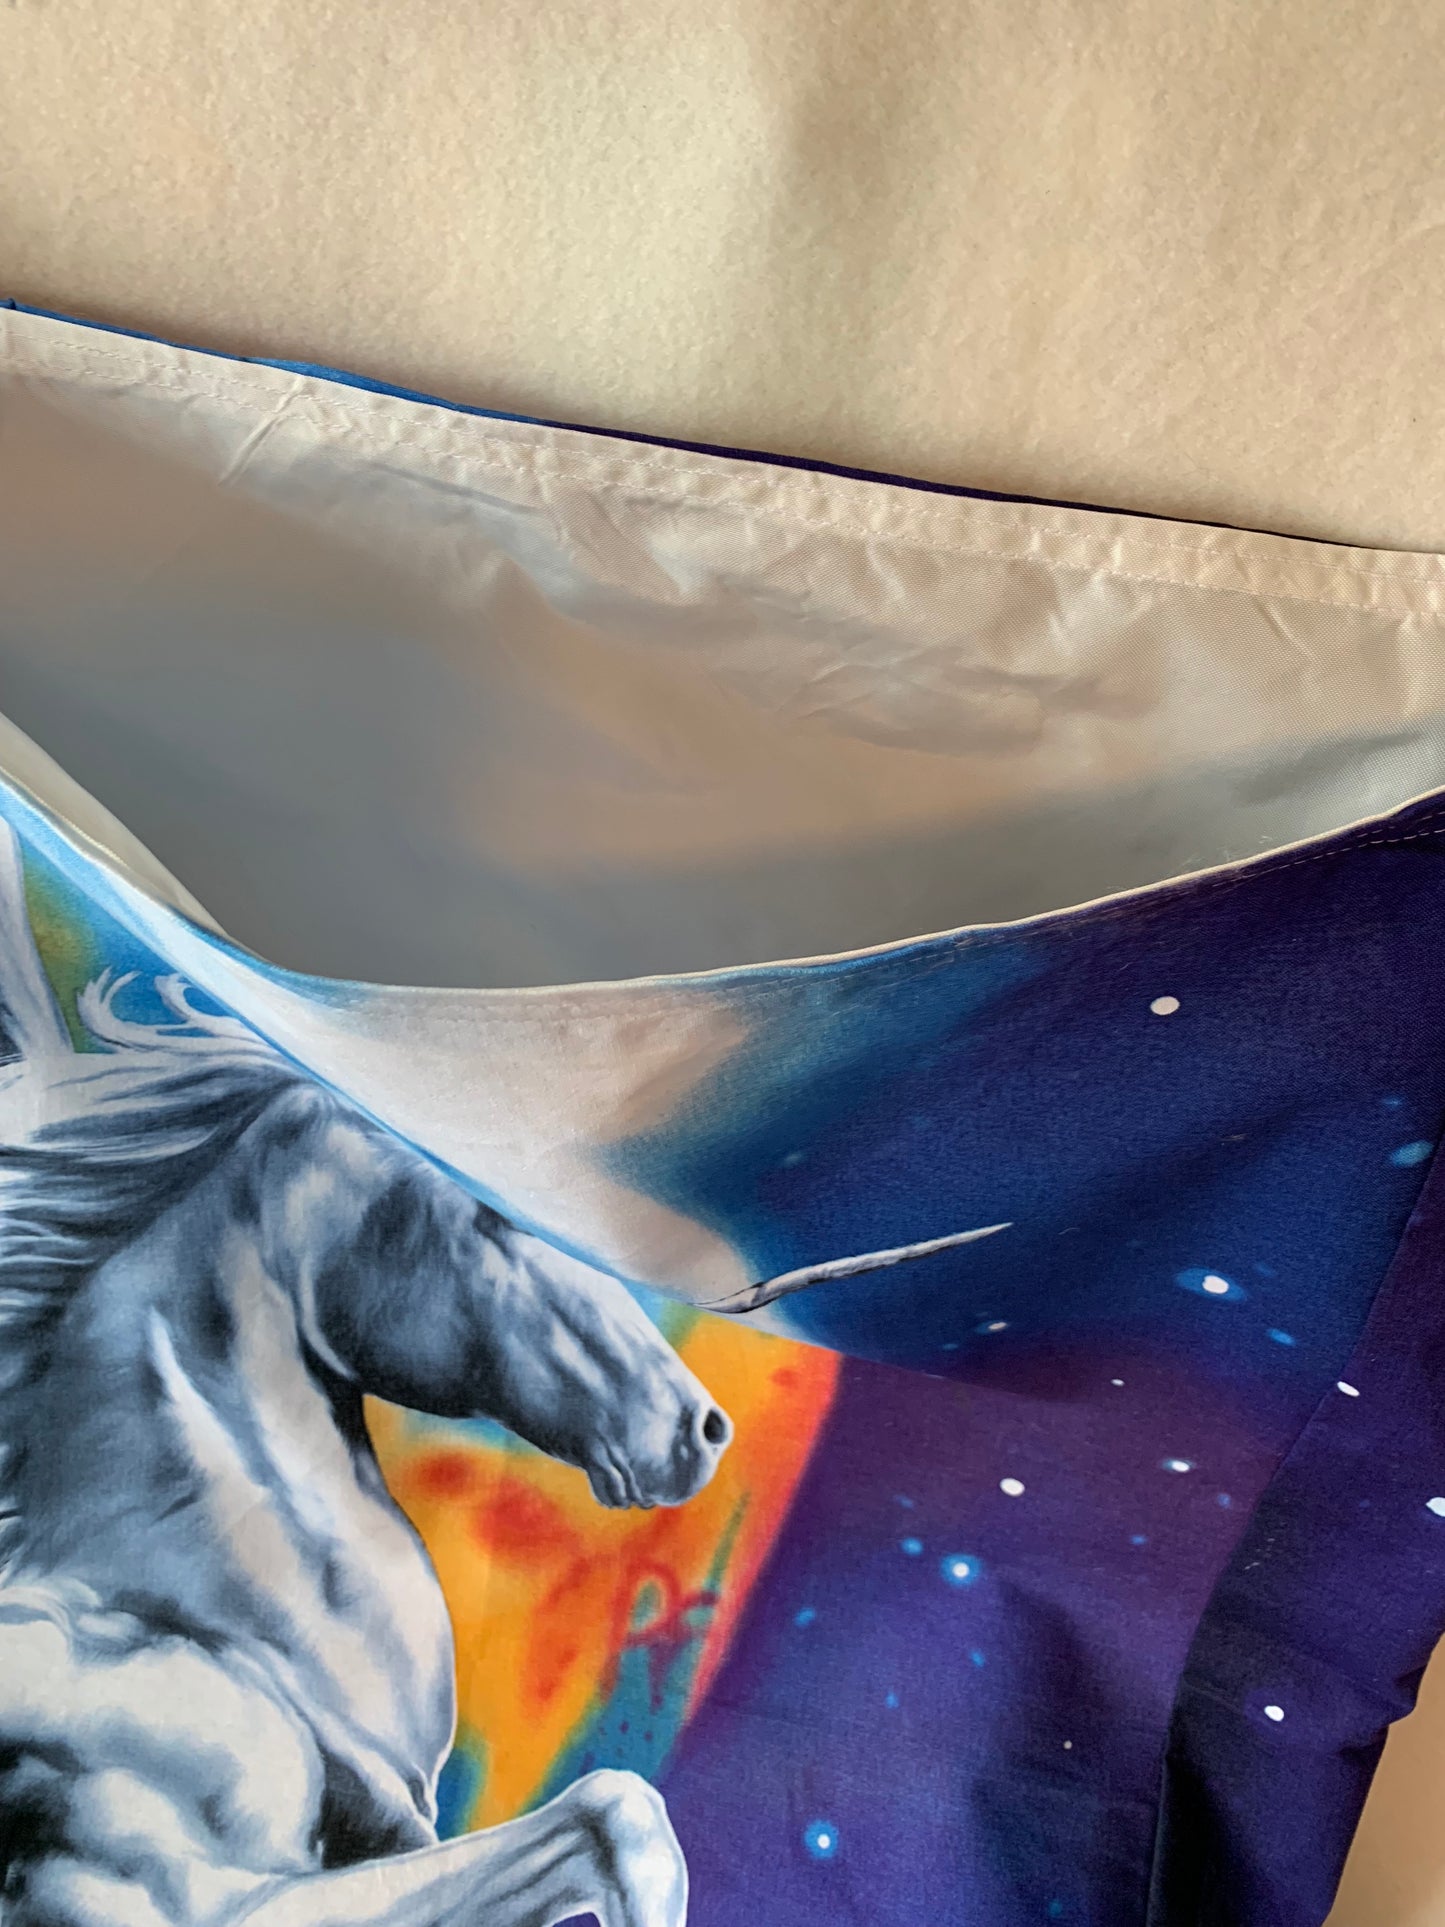 Extra large Tote bag in Pegasus cotton and heavy duty nylon lining with seat belt strap, moon & stars